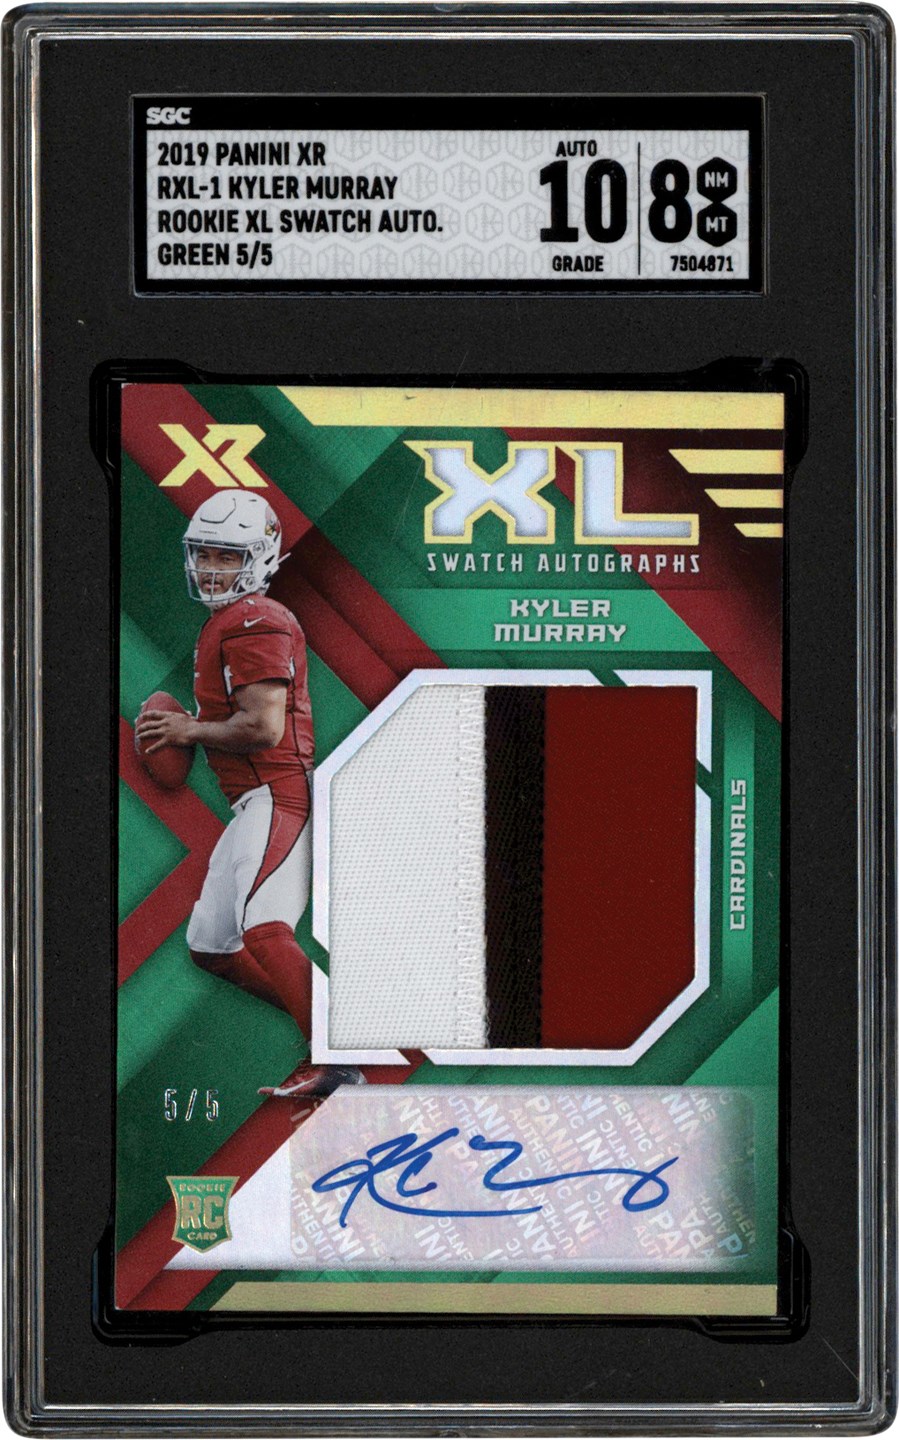 - 2019 Panini XR #RXL-1 Kyler Murray Rookie Patch Autograph Green #5/5 SGC NM-MT 8 Auto 10